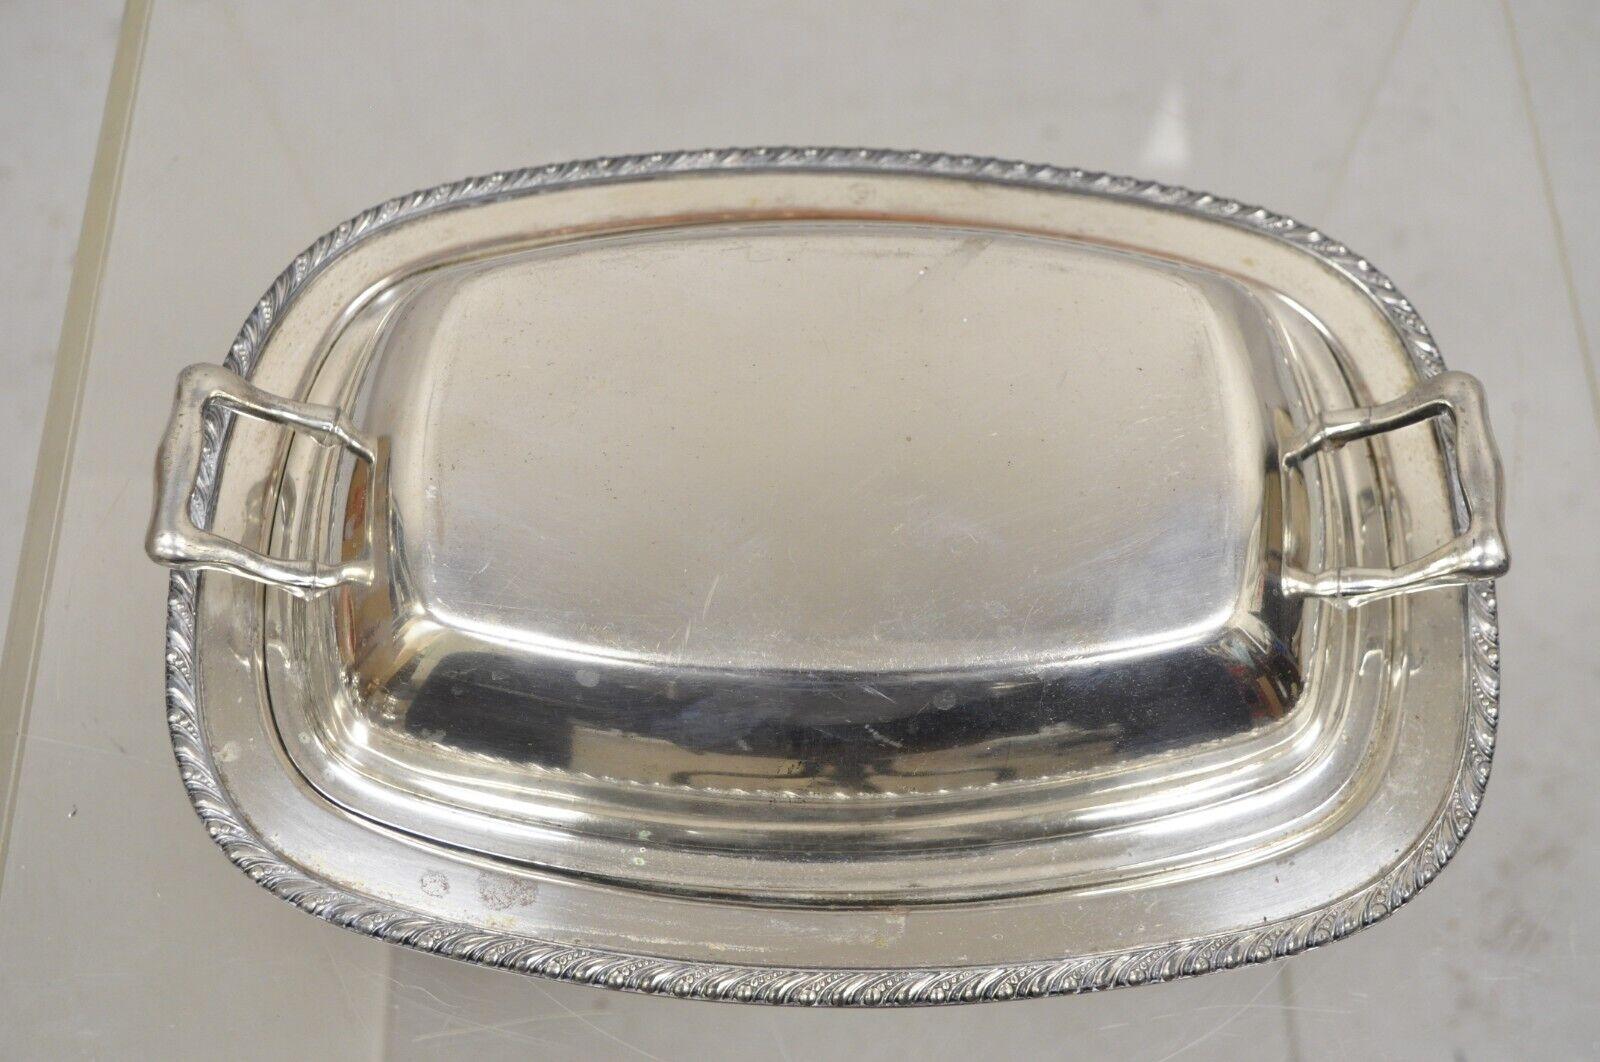 Vintage World Silver on Copper Lidded Vegetable Serving Platter with Handles. Circa Mid 20th Century. Measurements:  3.75